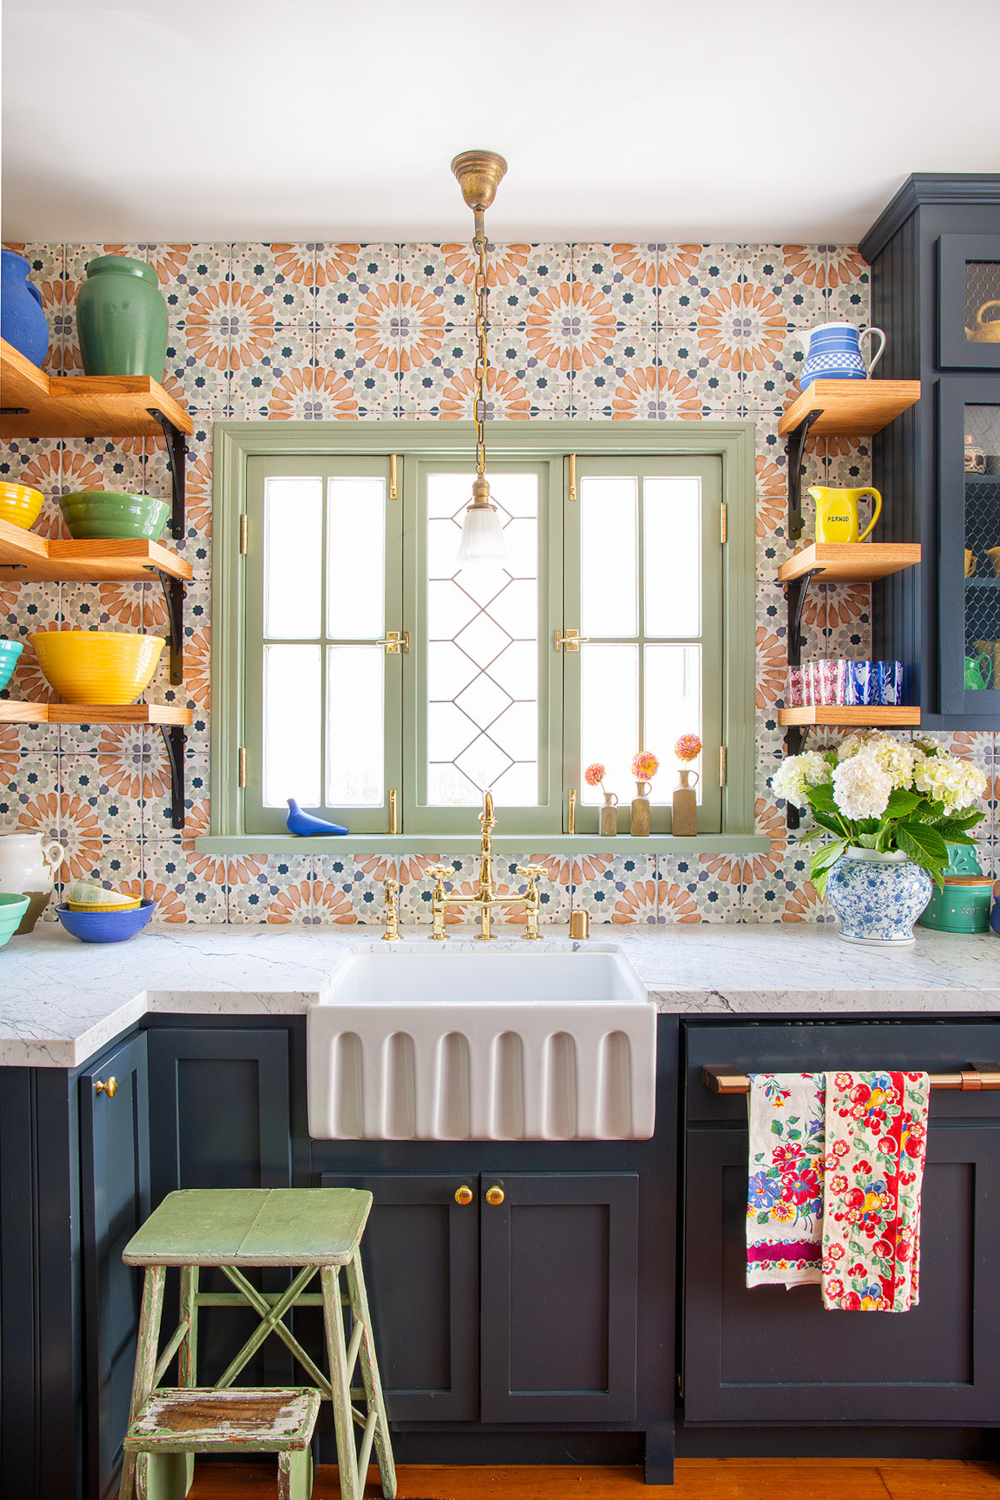 Colorful orange, blue, and white kitchen backsplash accented by a light-green window and dark-blue cabinetry